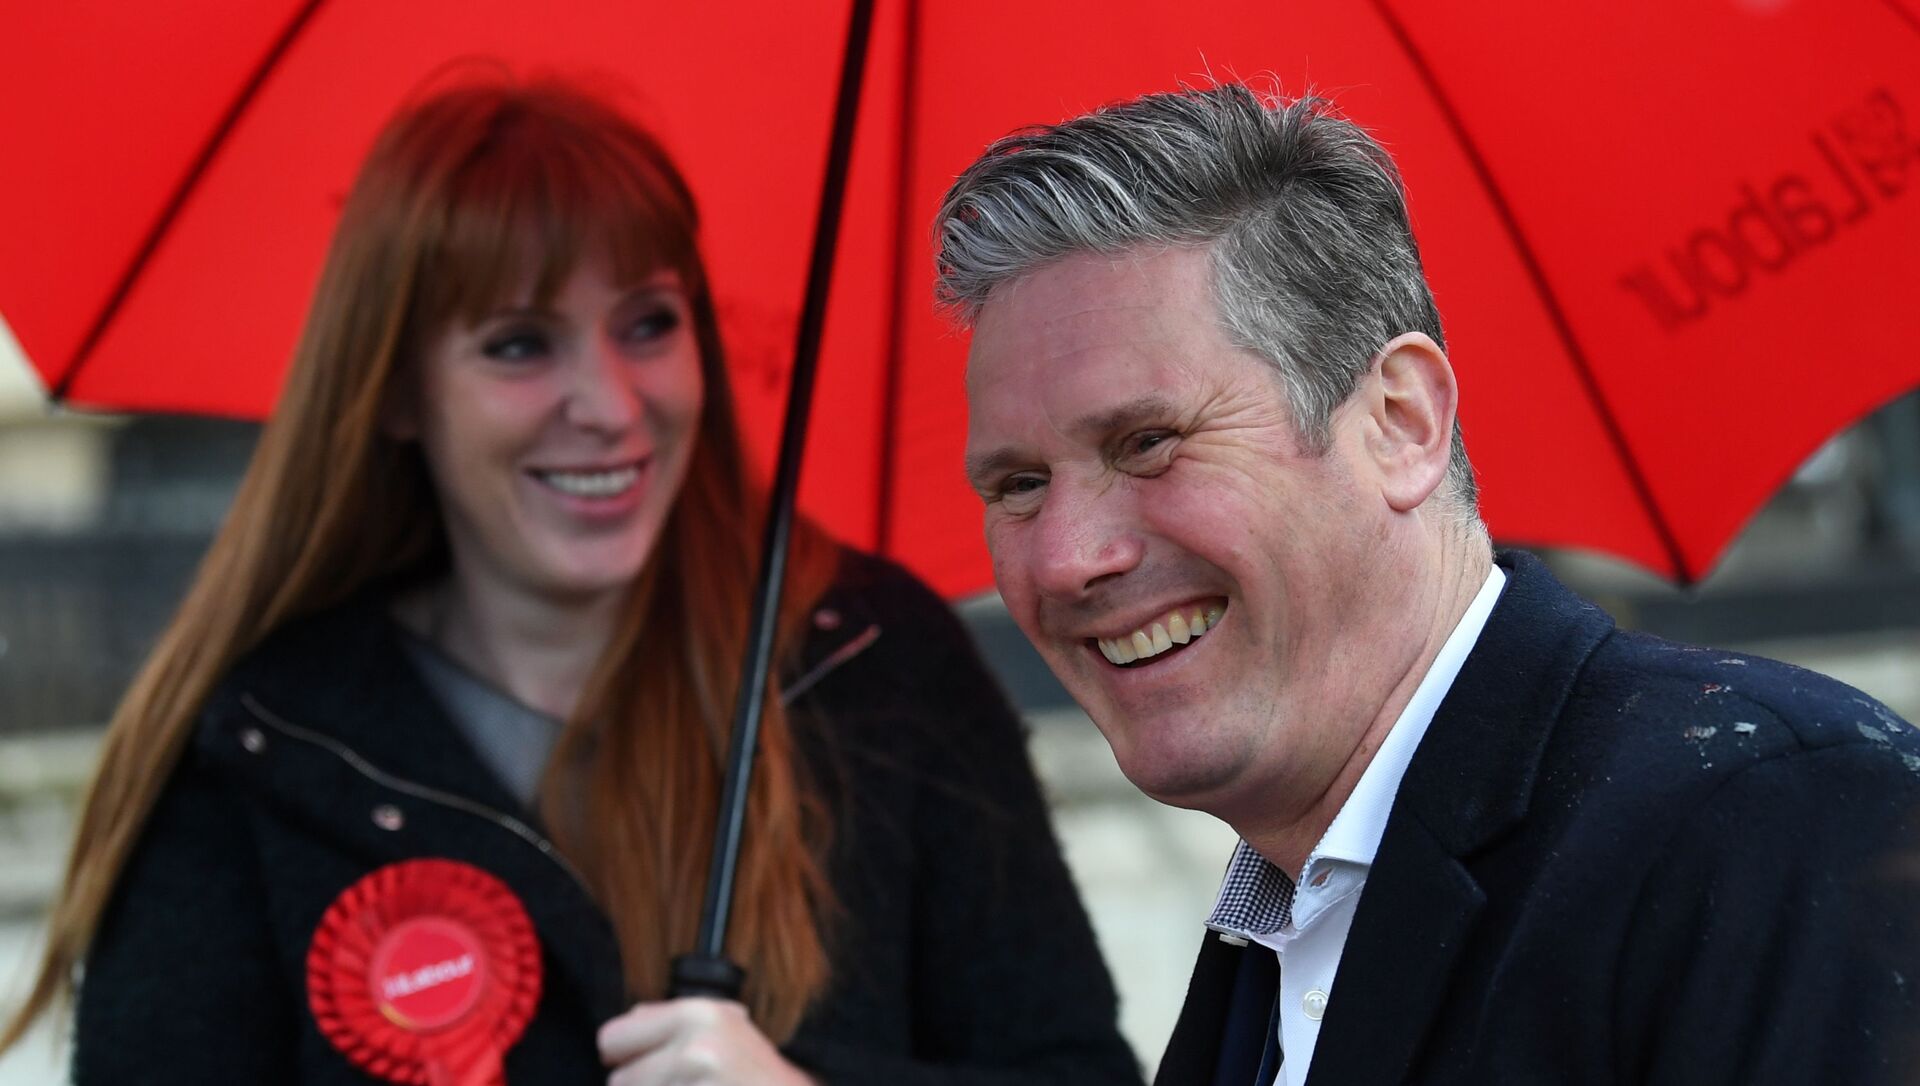 Labour Party leader Keir Starmer campaigns ahead of local elections, in Birmingham - Sputnik International, 1920, 12.05.2021